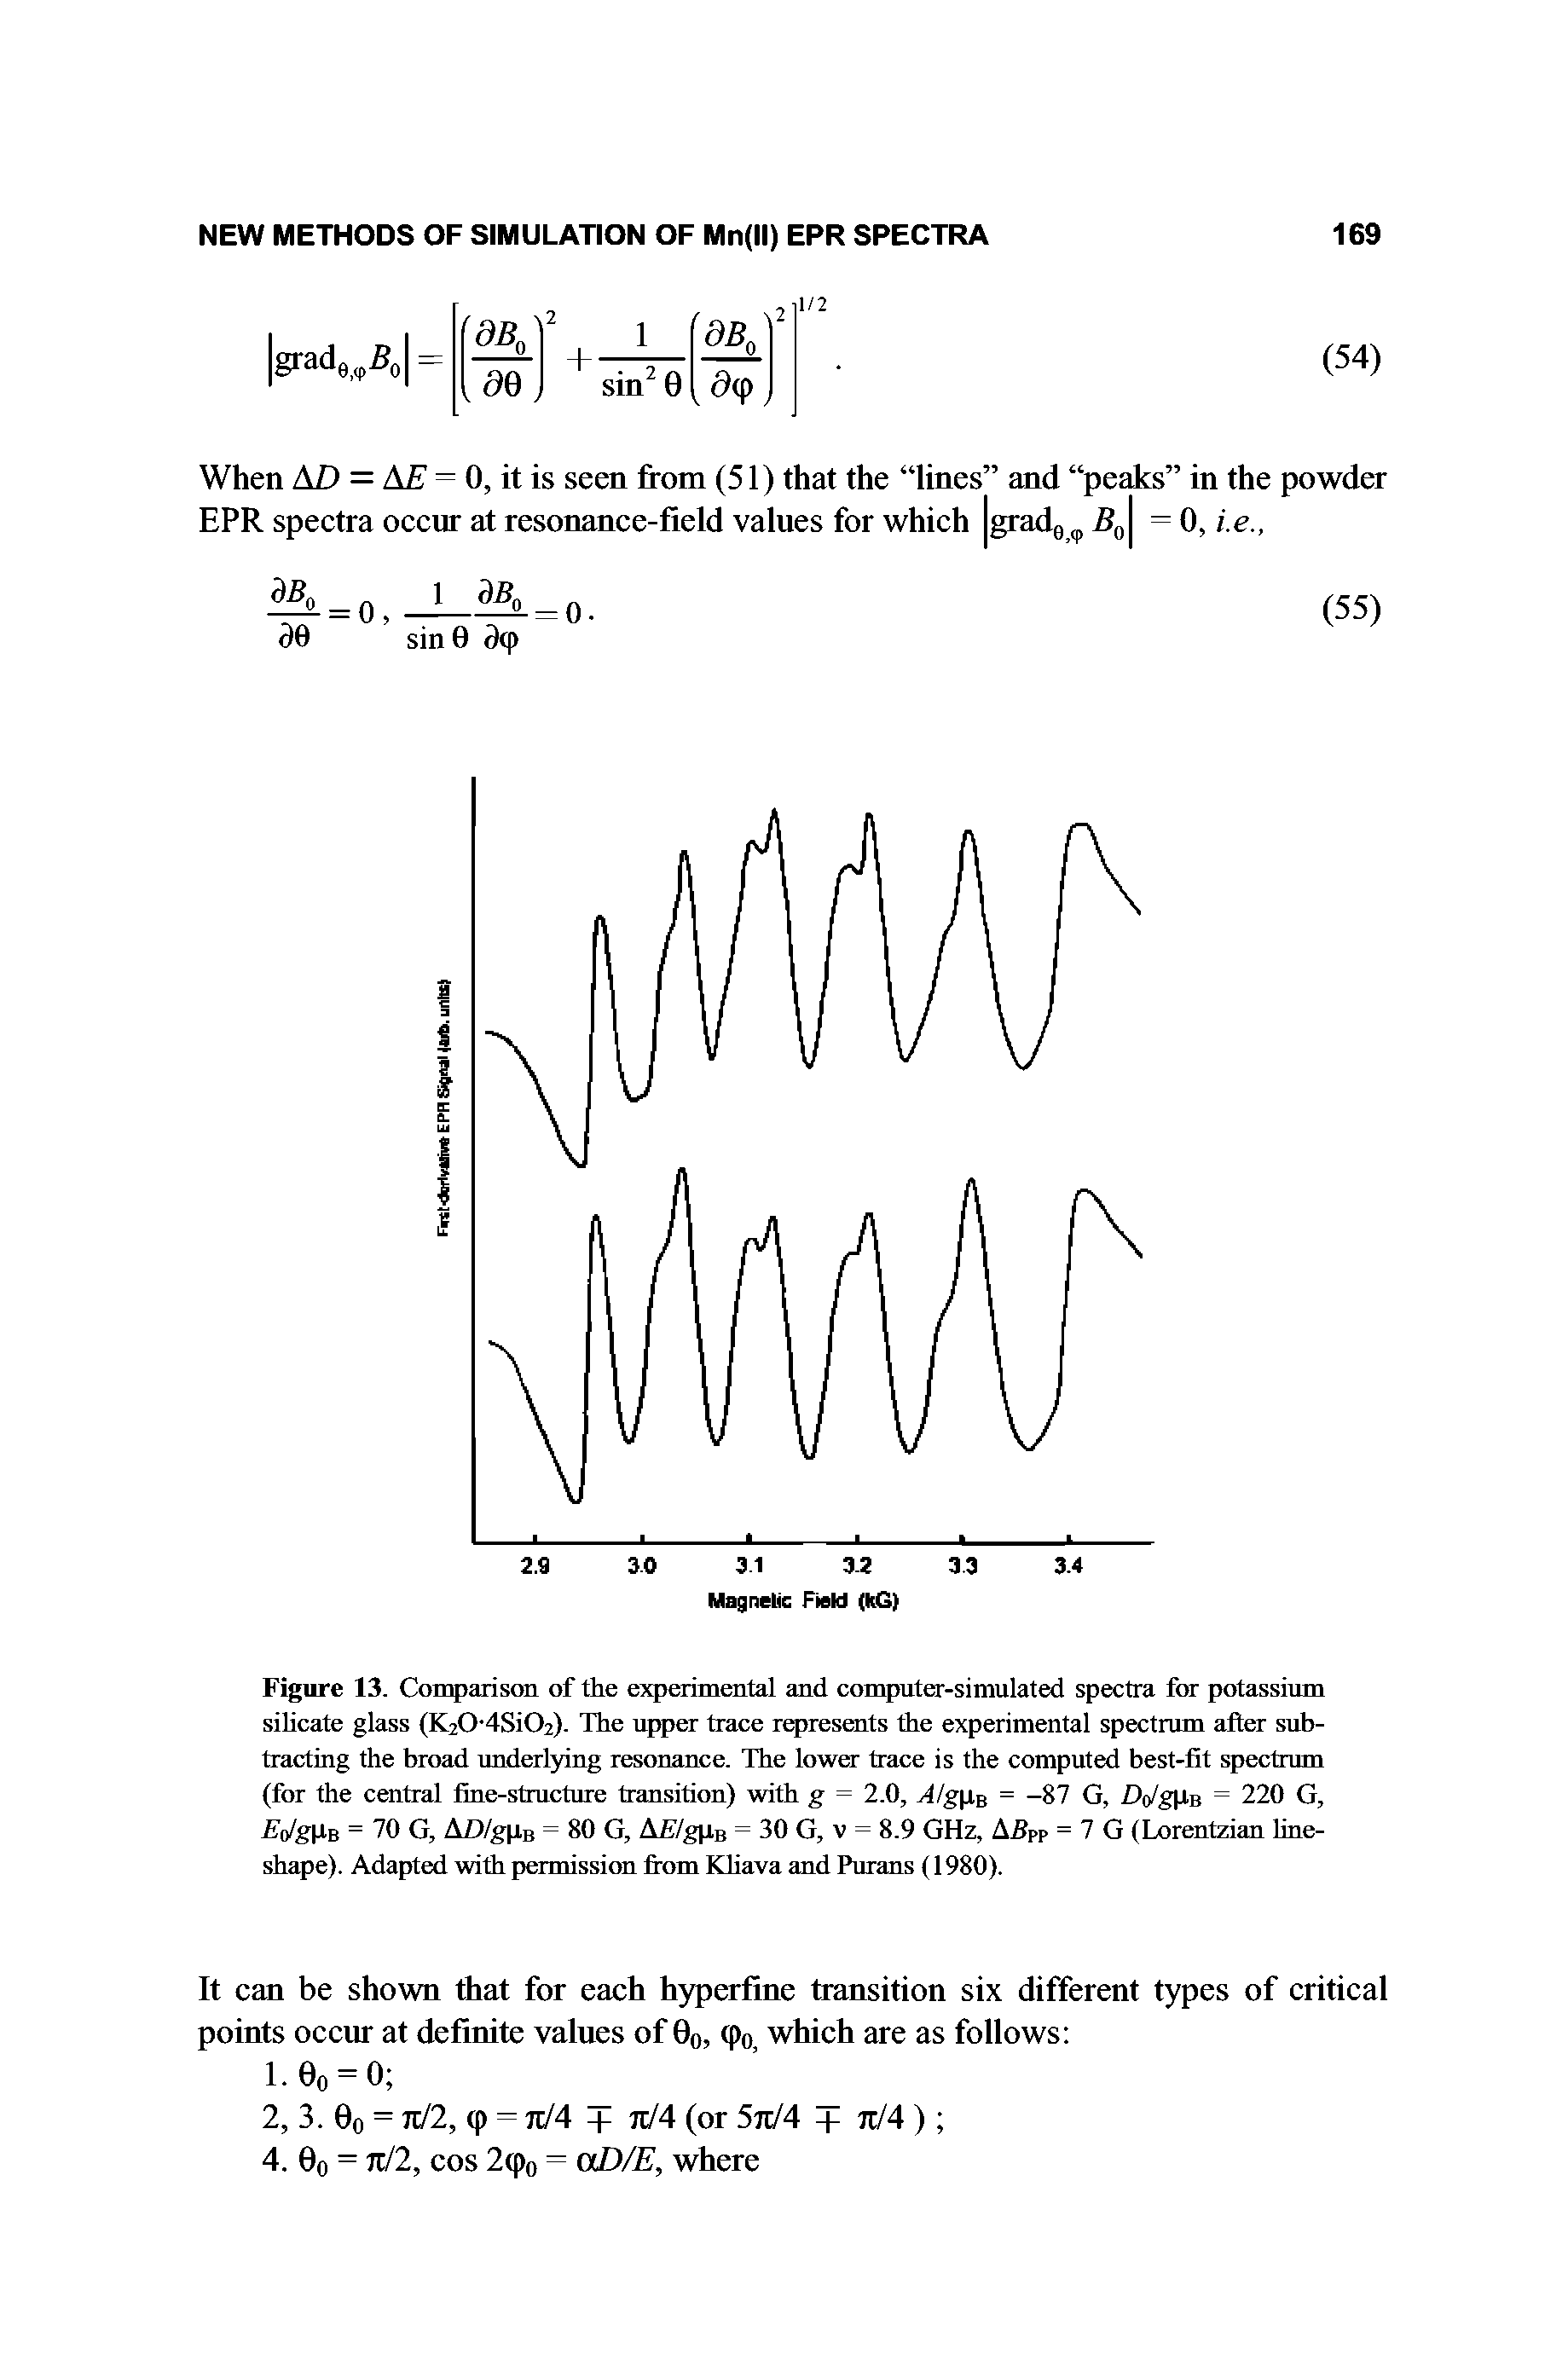 Figure 13. Comparison of the experimental and computer-simulated spectra for potassium silicate glass (K20-4Si02). The upper trace represents the experimental spectrum after subtracting the broad underlying resonance. The lower trace is the computed best-fit spectrum (for the central fine-structure transition) with g = 2.0, A g is = -87 G, Do/gpu = 220 G, = 70 G, AZ)/gpB = 80 G, AF/gpe = 30 G, v = 8.9 GHz, A5pp = 7 G (Lorentzian line-shape). Adapted with permission from Khava and Purans (1980).